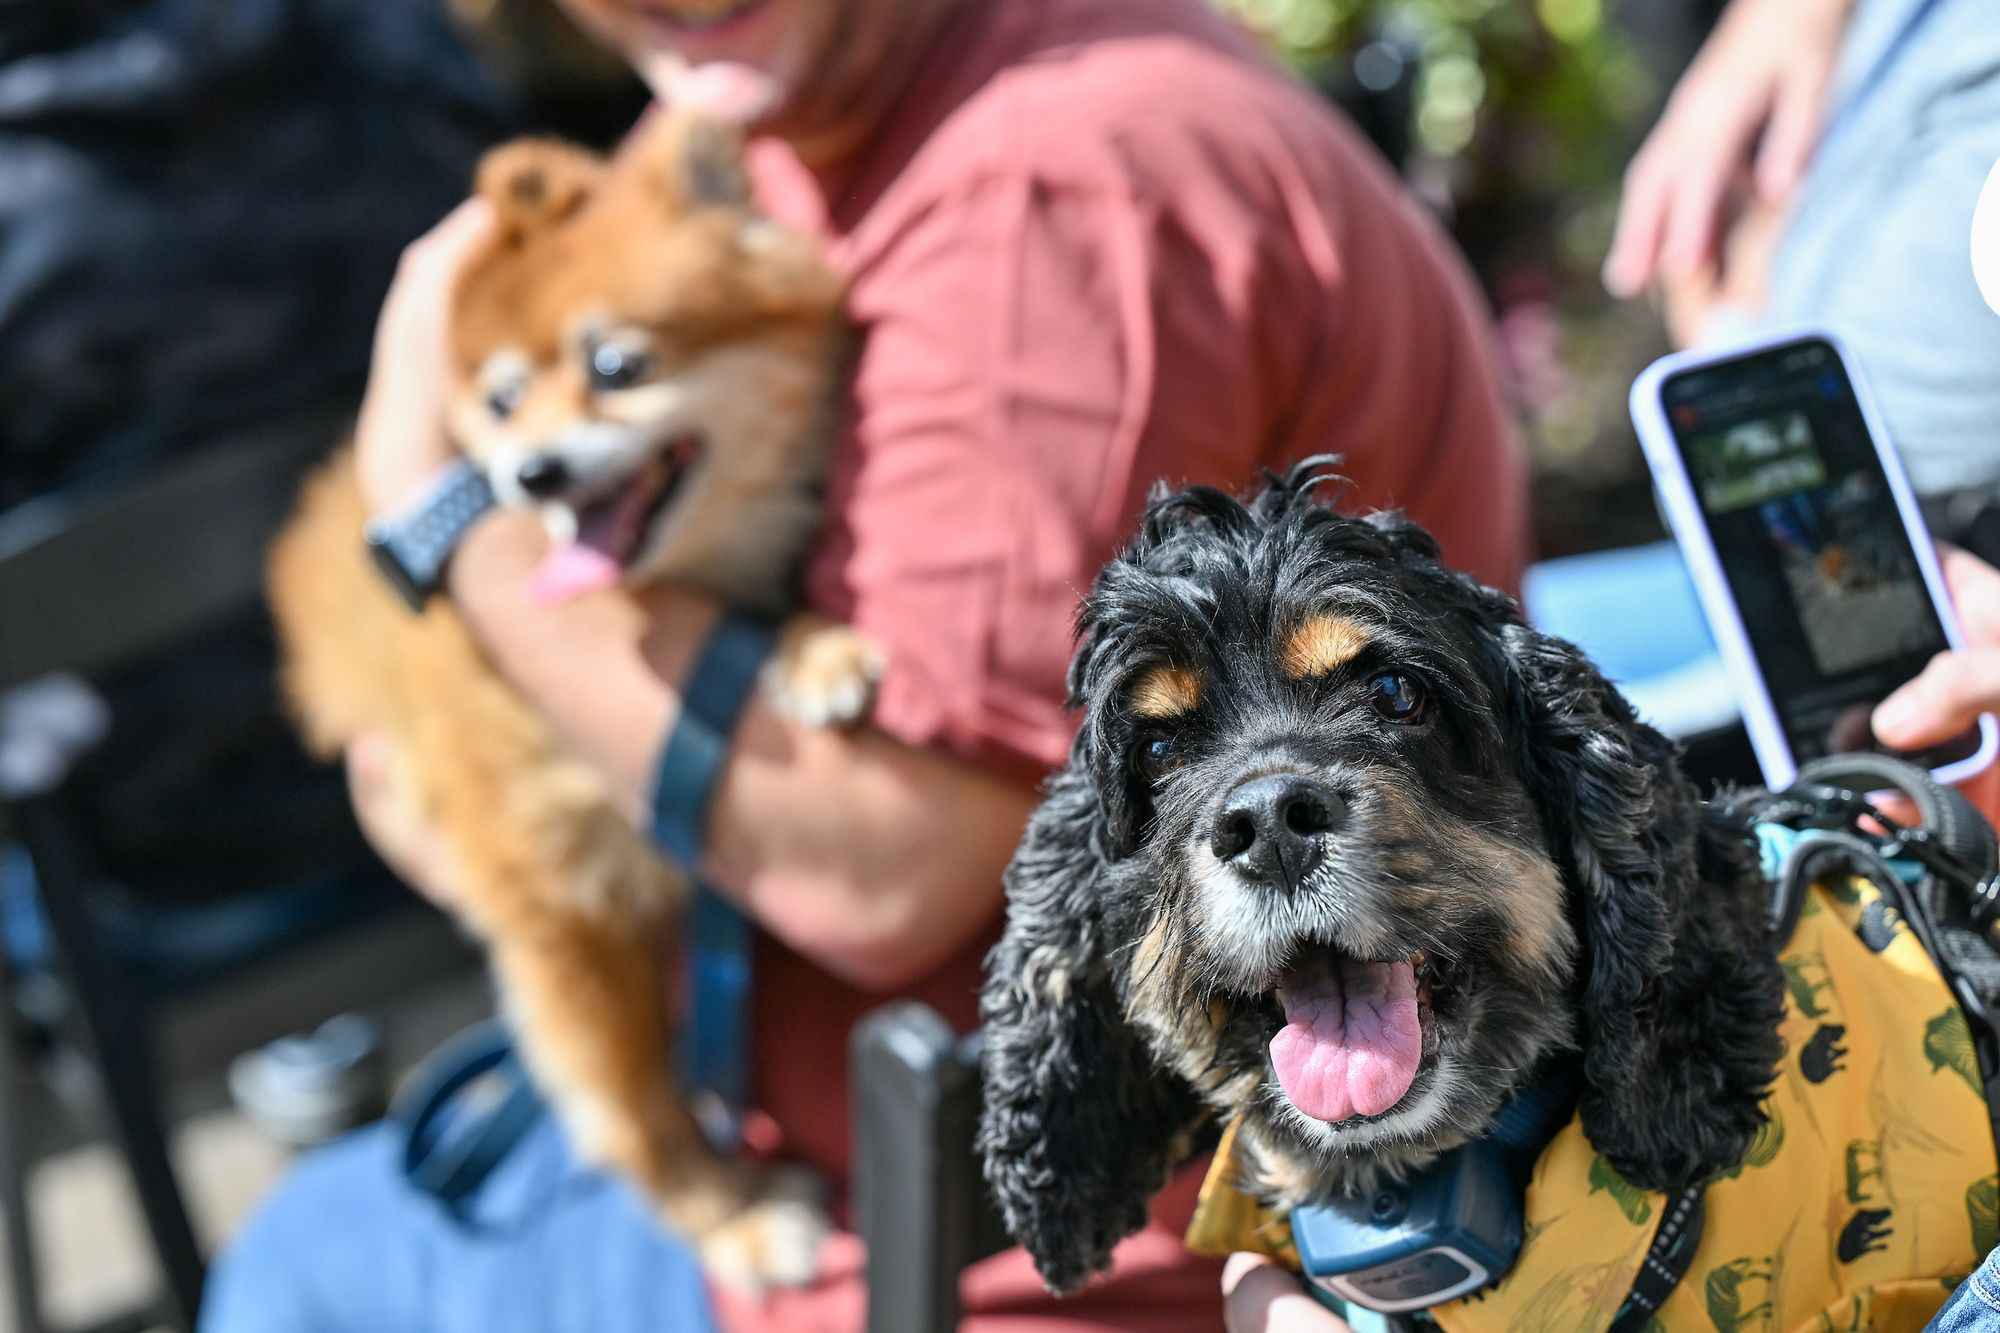 Bay Ridge's Canine Haven: NYC Parks' $1M Dog Run Honors Beloved Resident